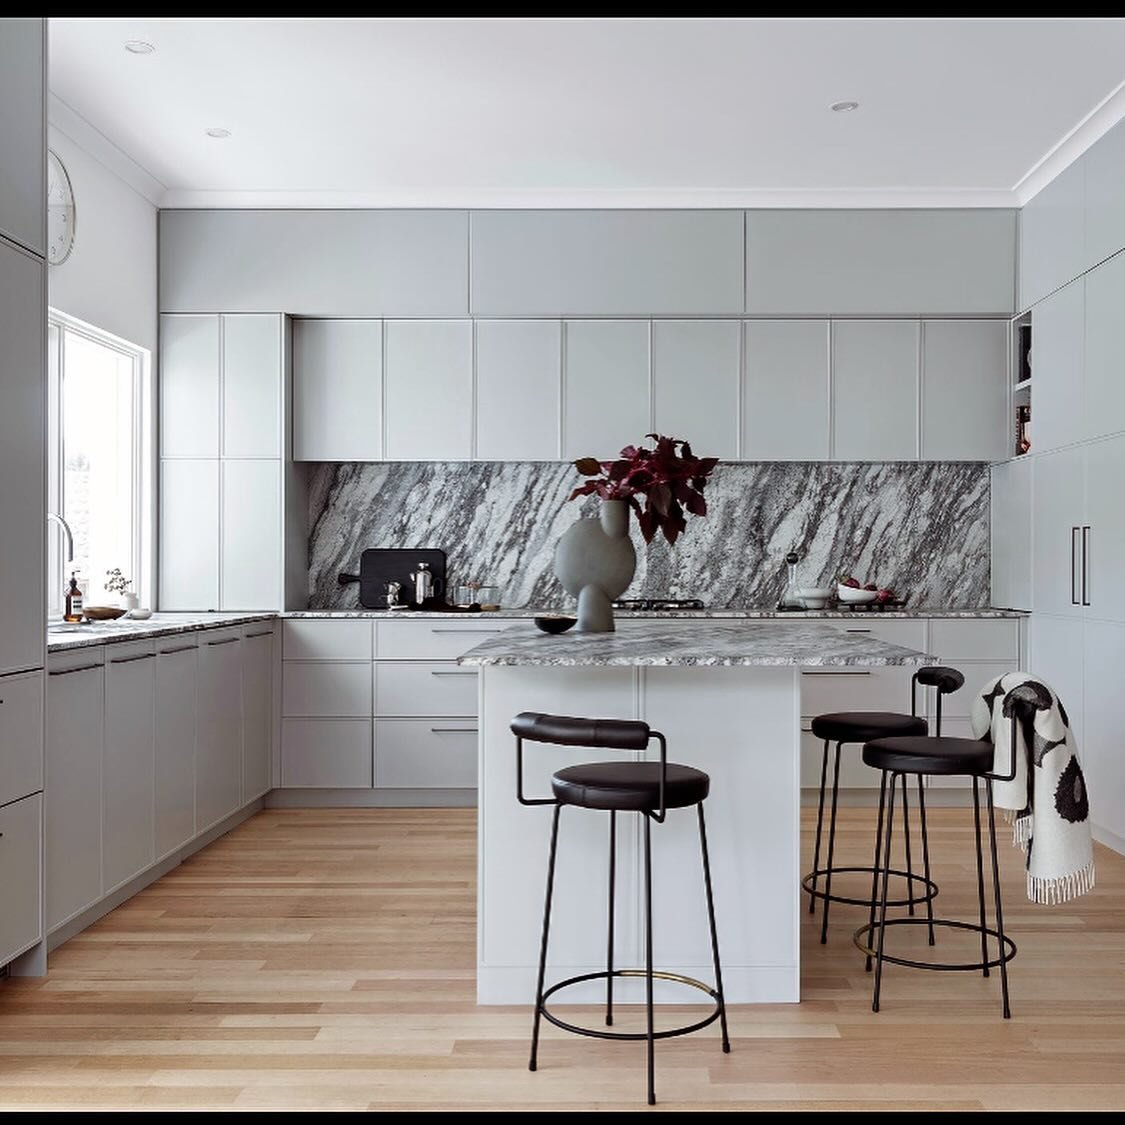 ROCK STAR

Glamour and functionality collide in this extraordinary project by designer Emma Hann, who transformed the original space into a kitchen with it all. Opulent touches and designer pieces by Tom Dixon and Grazia are the 🍒 on this delicious 